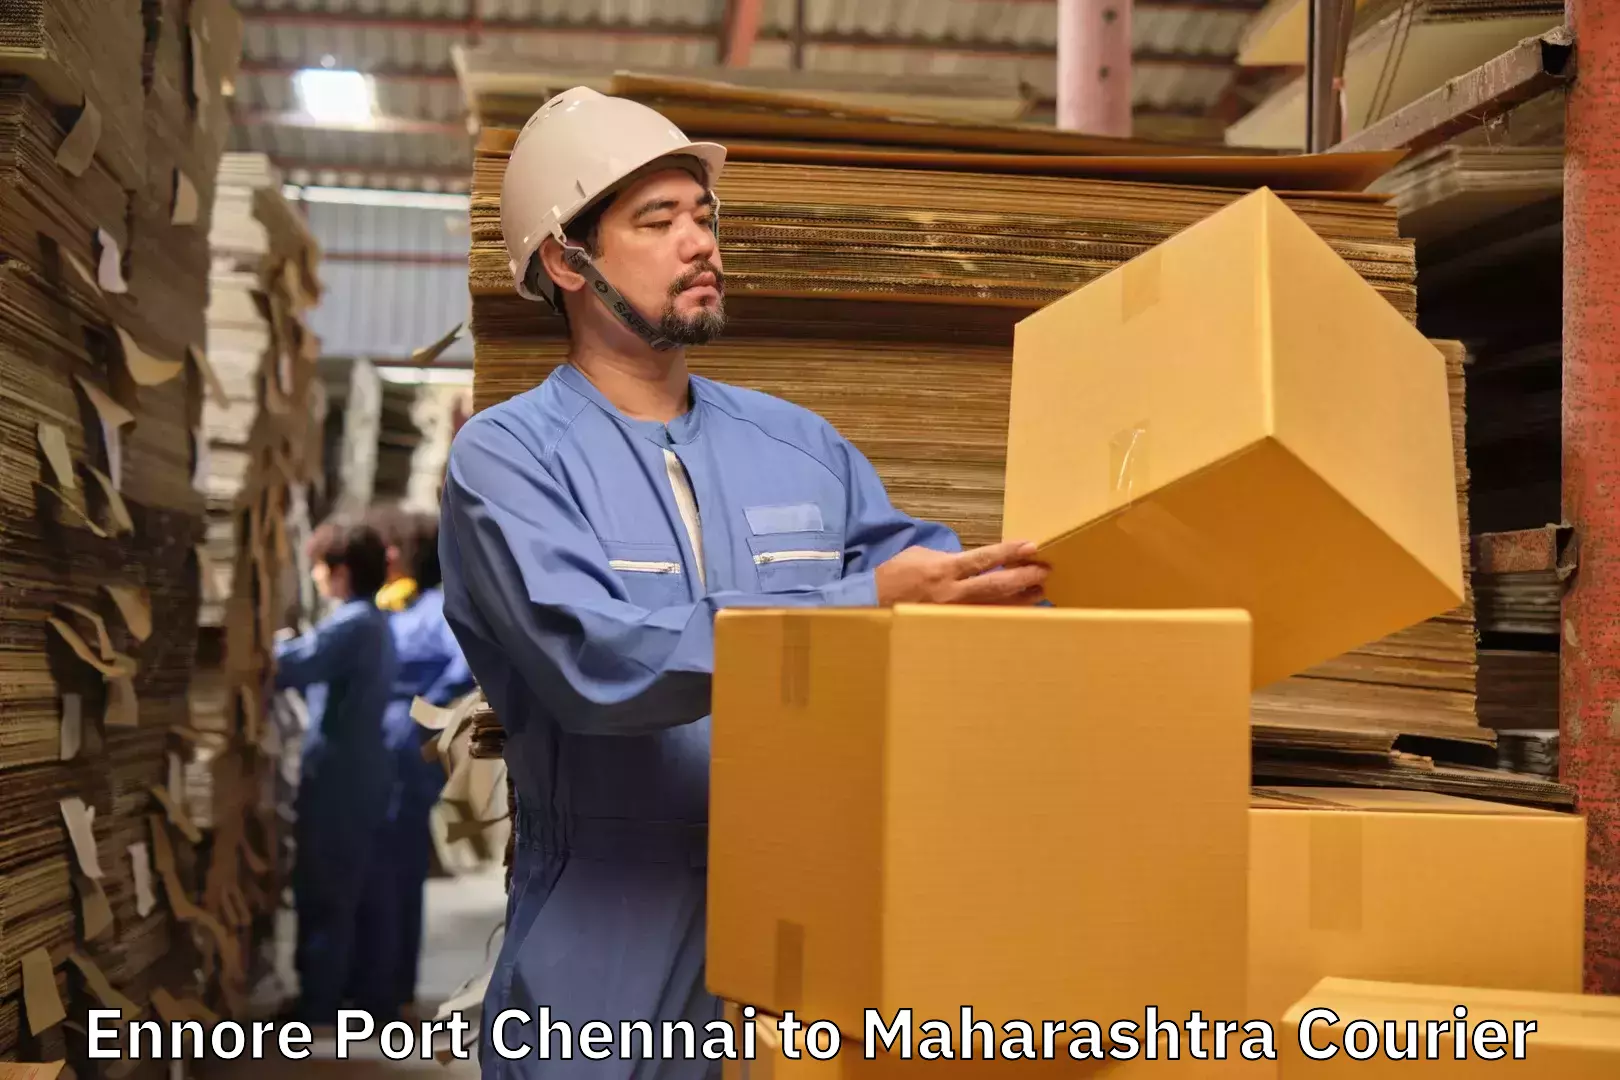 Baggage shipping rates calculator Ennore Port Chennai to Chiplun